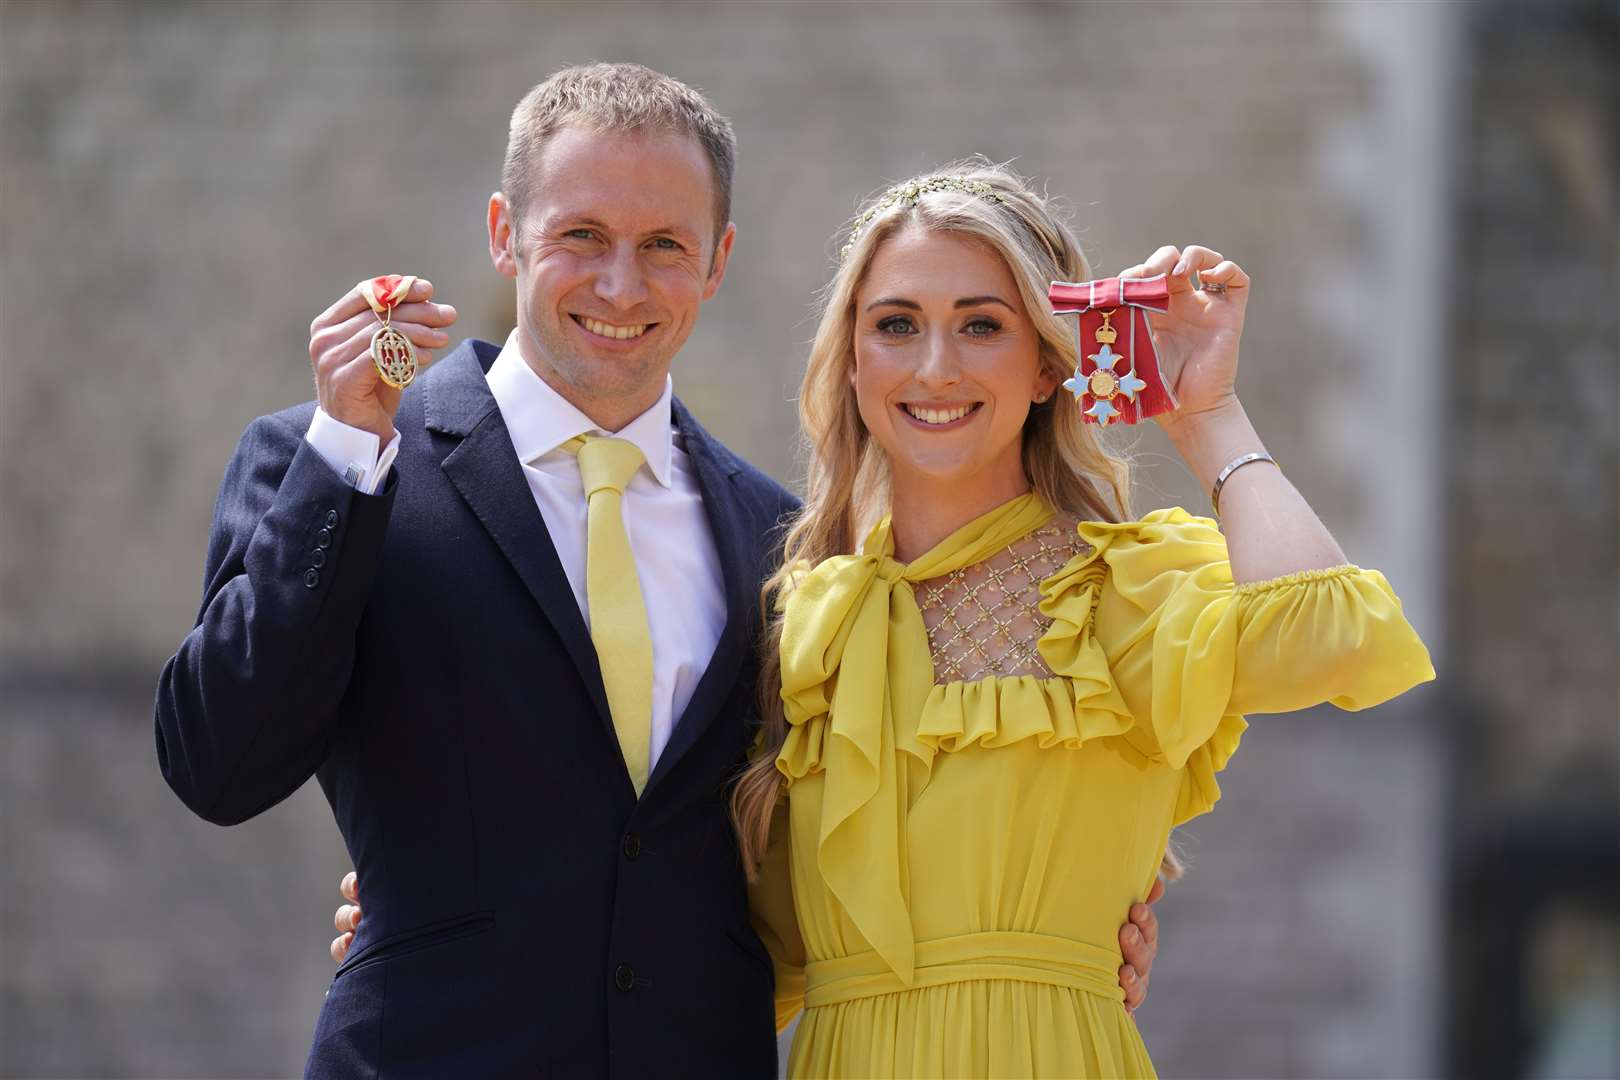 Sir Jason Kenny and Dame Laura Kenny after they received their Knight Bachelor and Dame Commander awards (Kirsty O’Connor/PA)